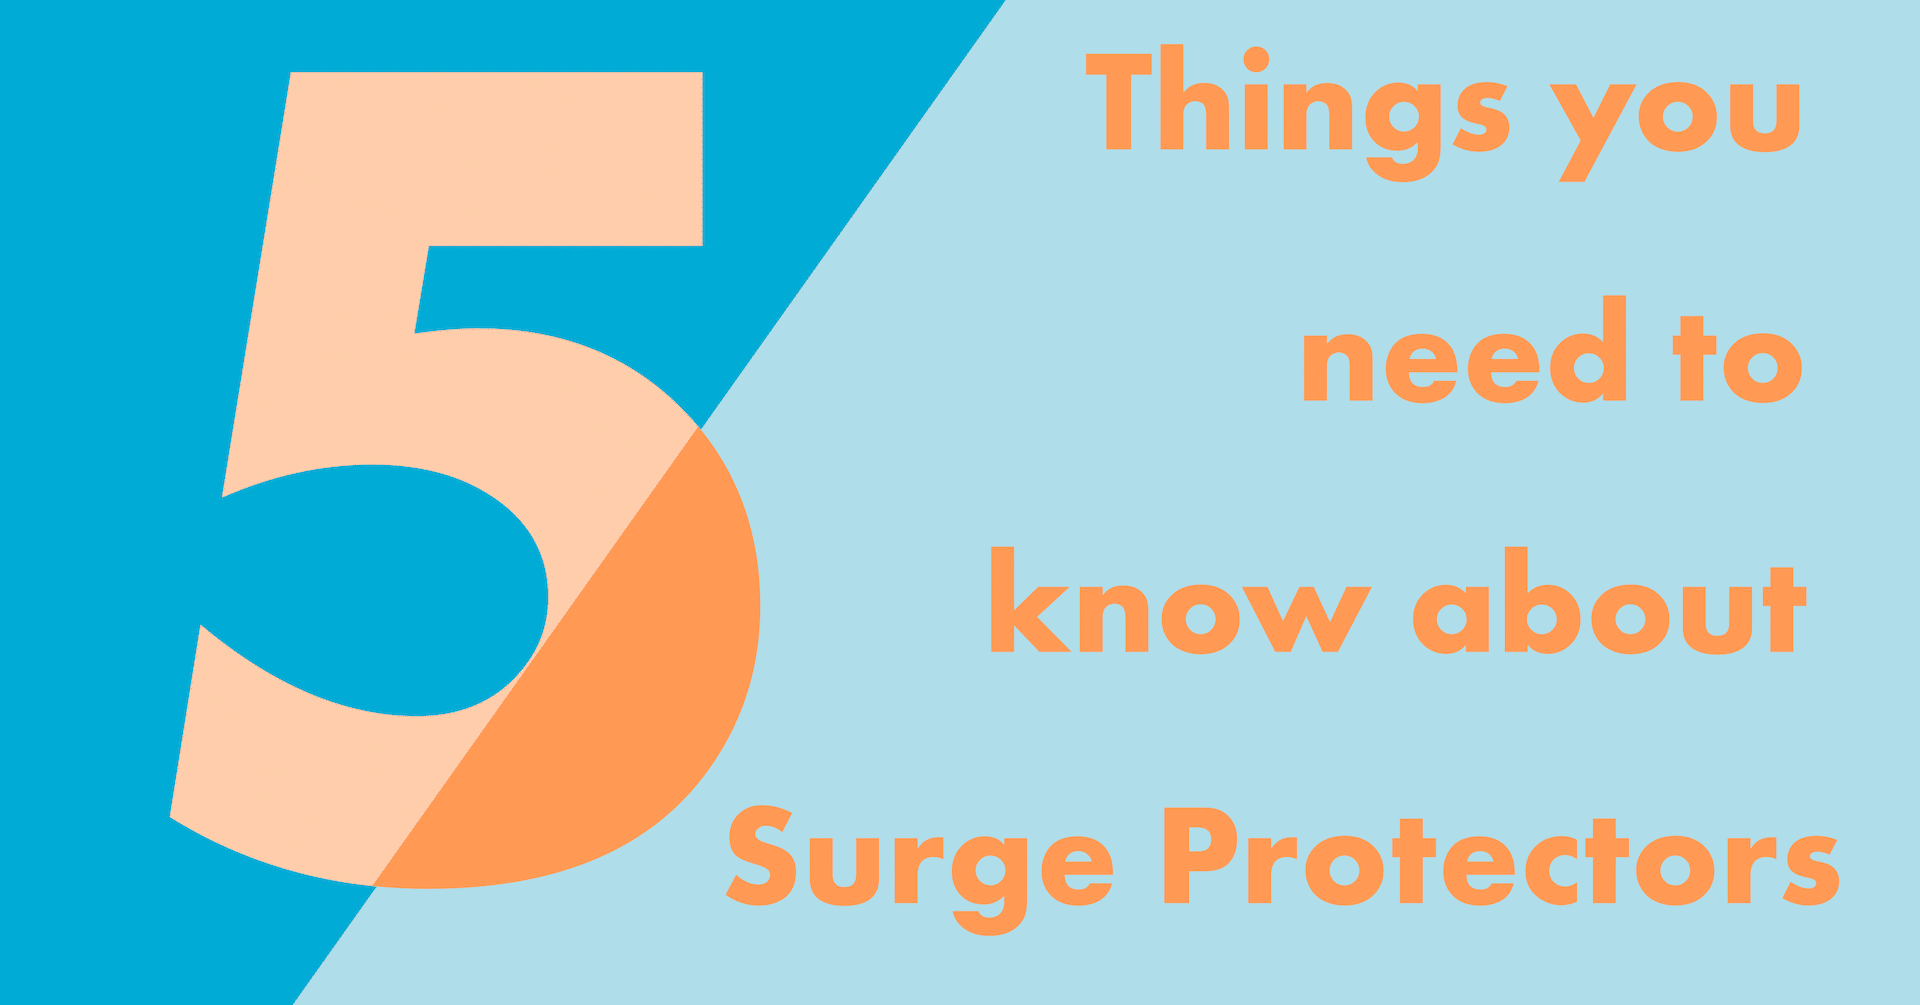 5 things you need to know about surge protectors